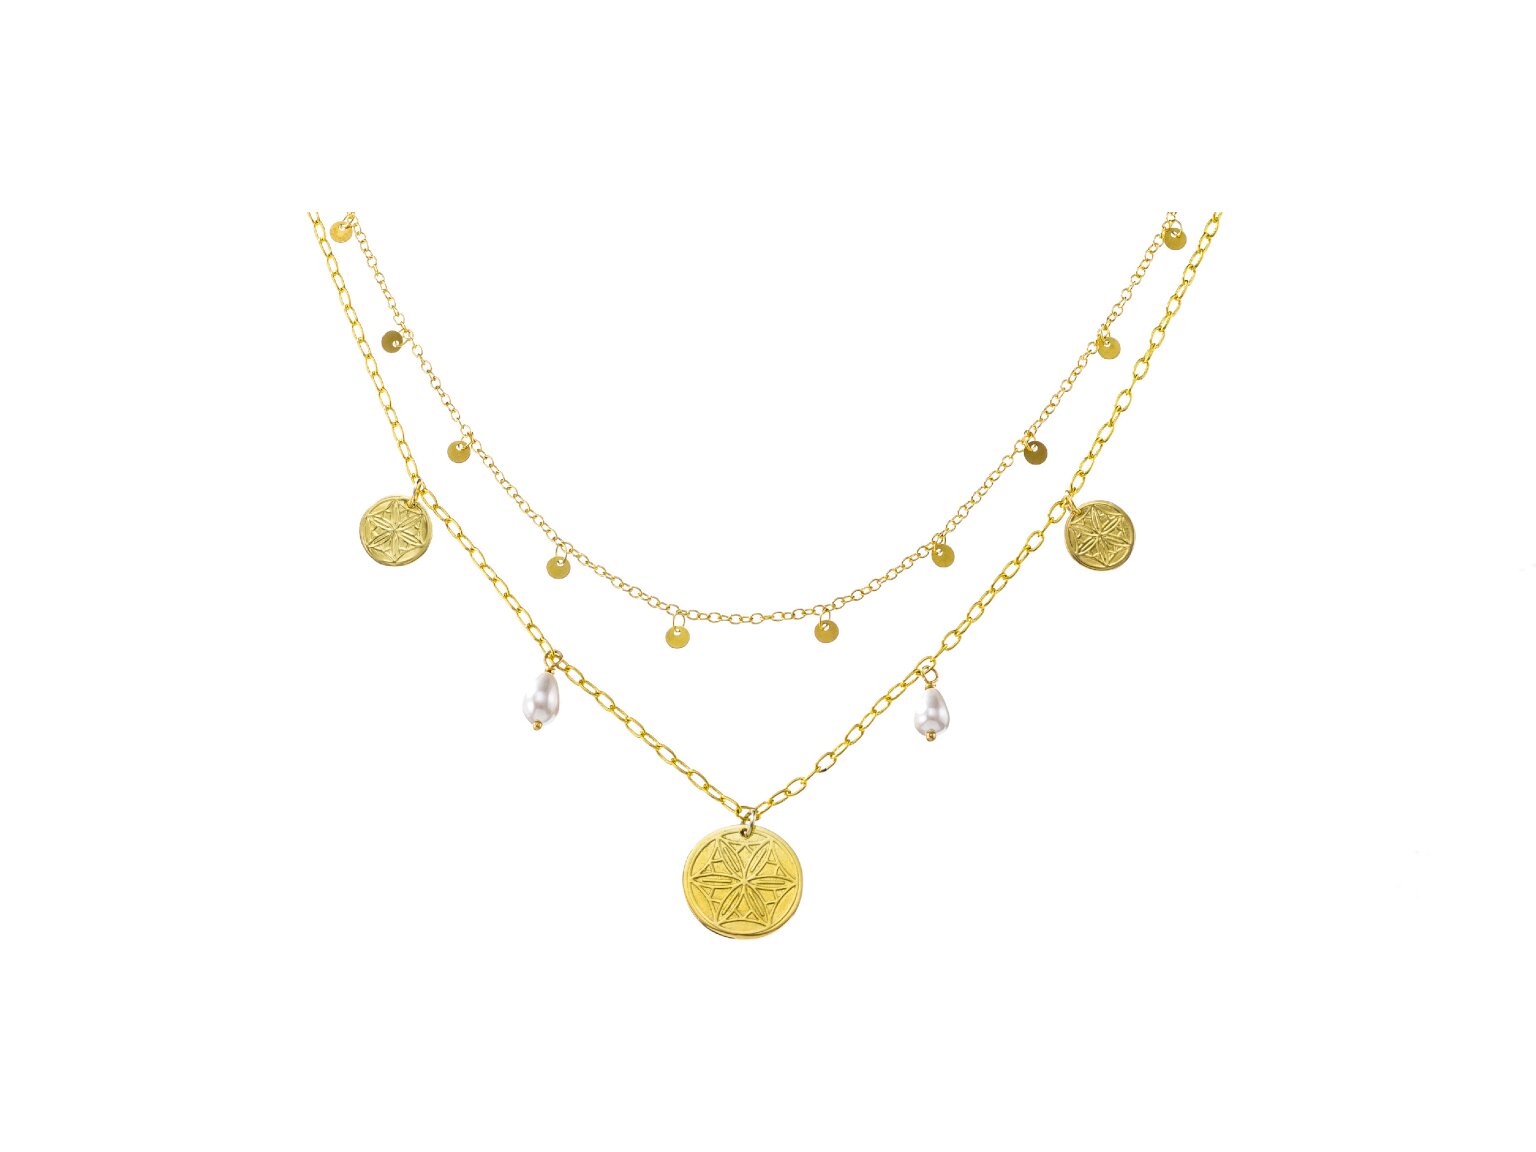 Double-strand necklace with golden discs